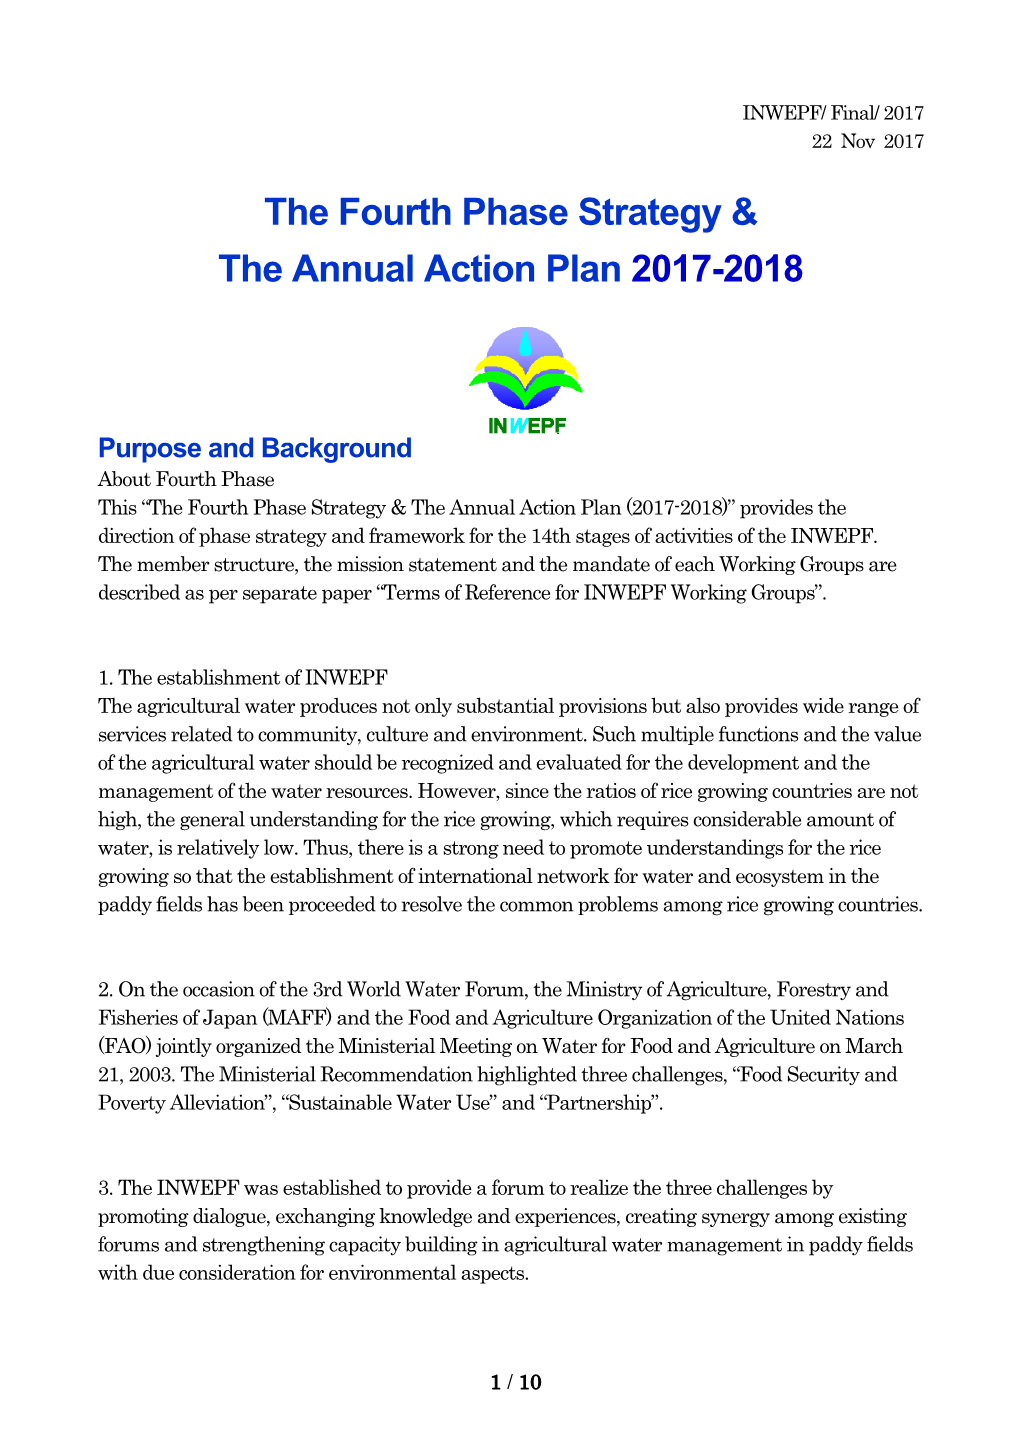 The Fourth Phase Strategy & the Annual Action Plan 2017-2018